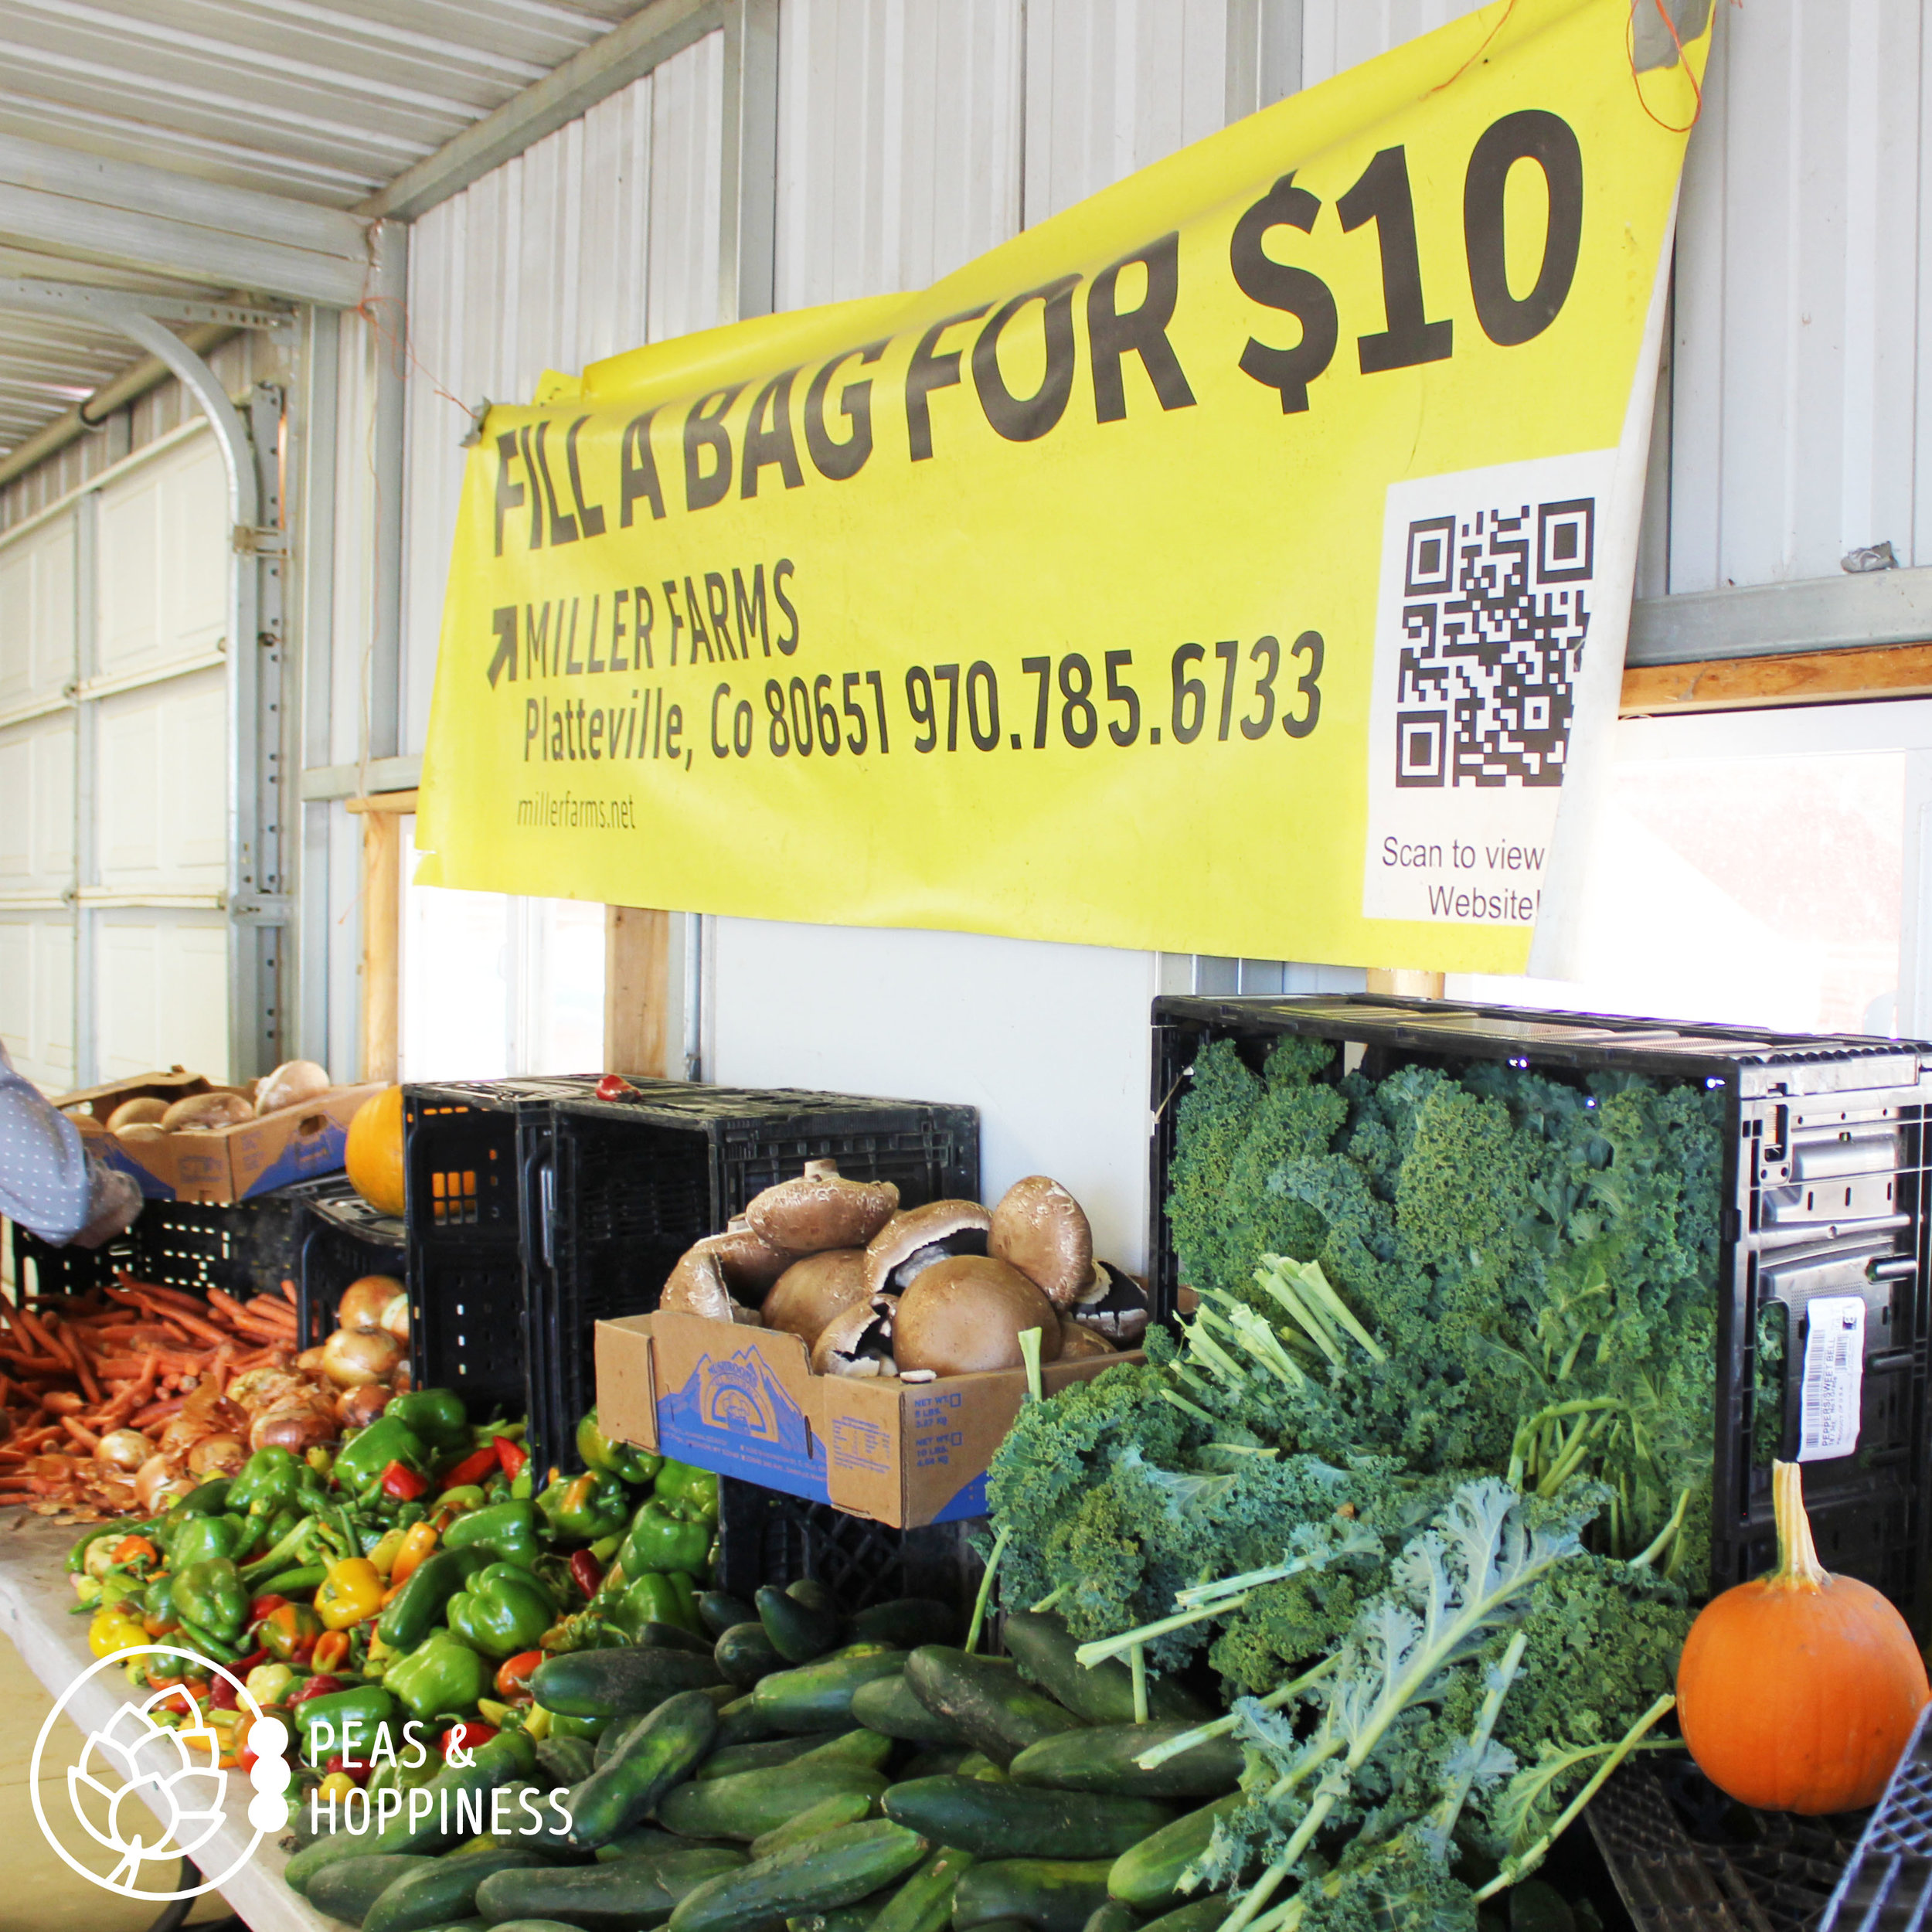 Produce at Miller Farms